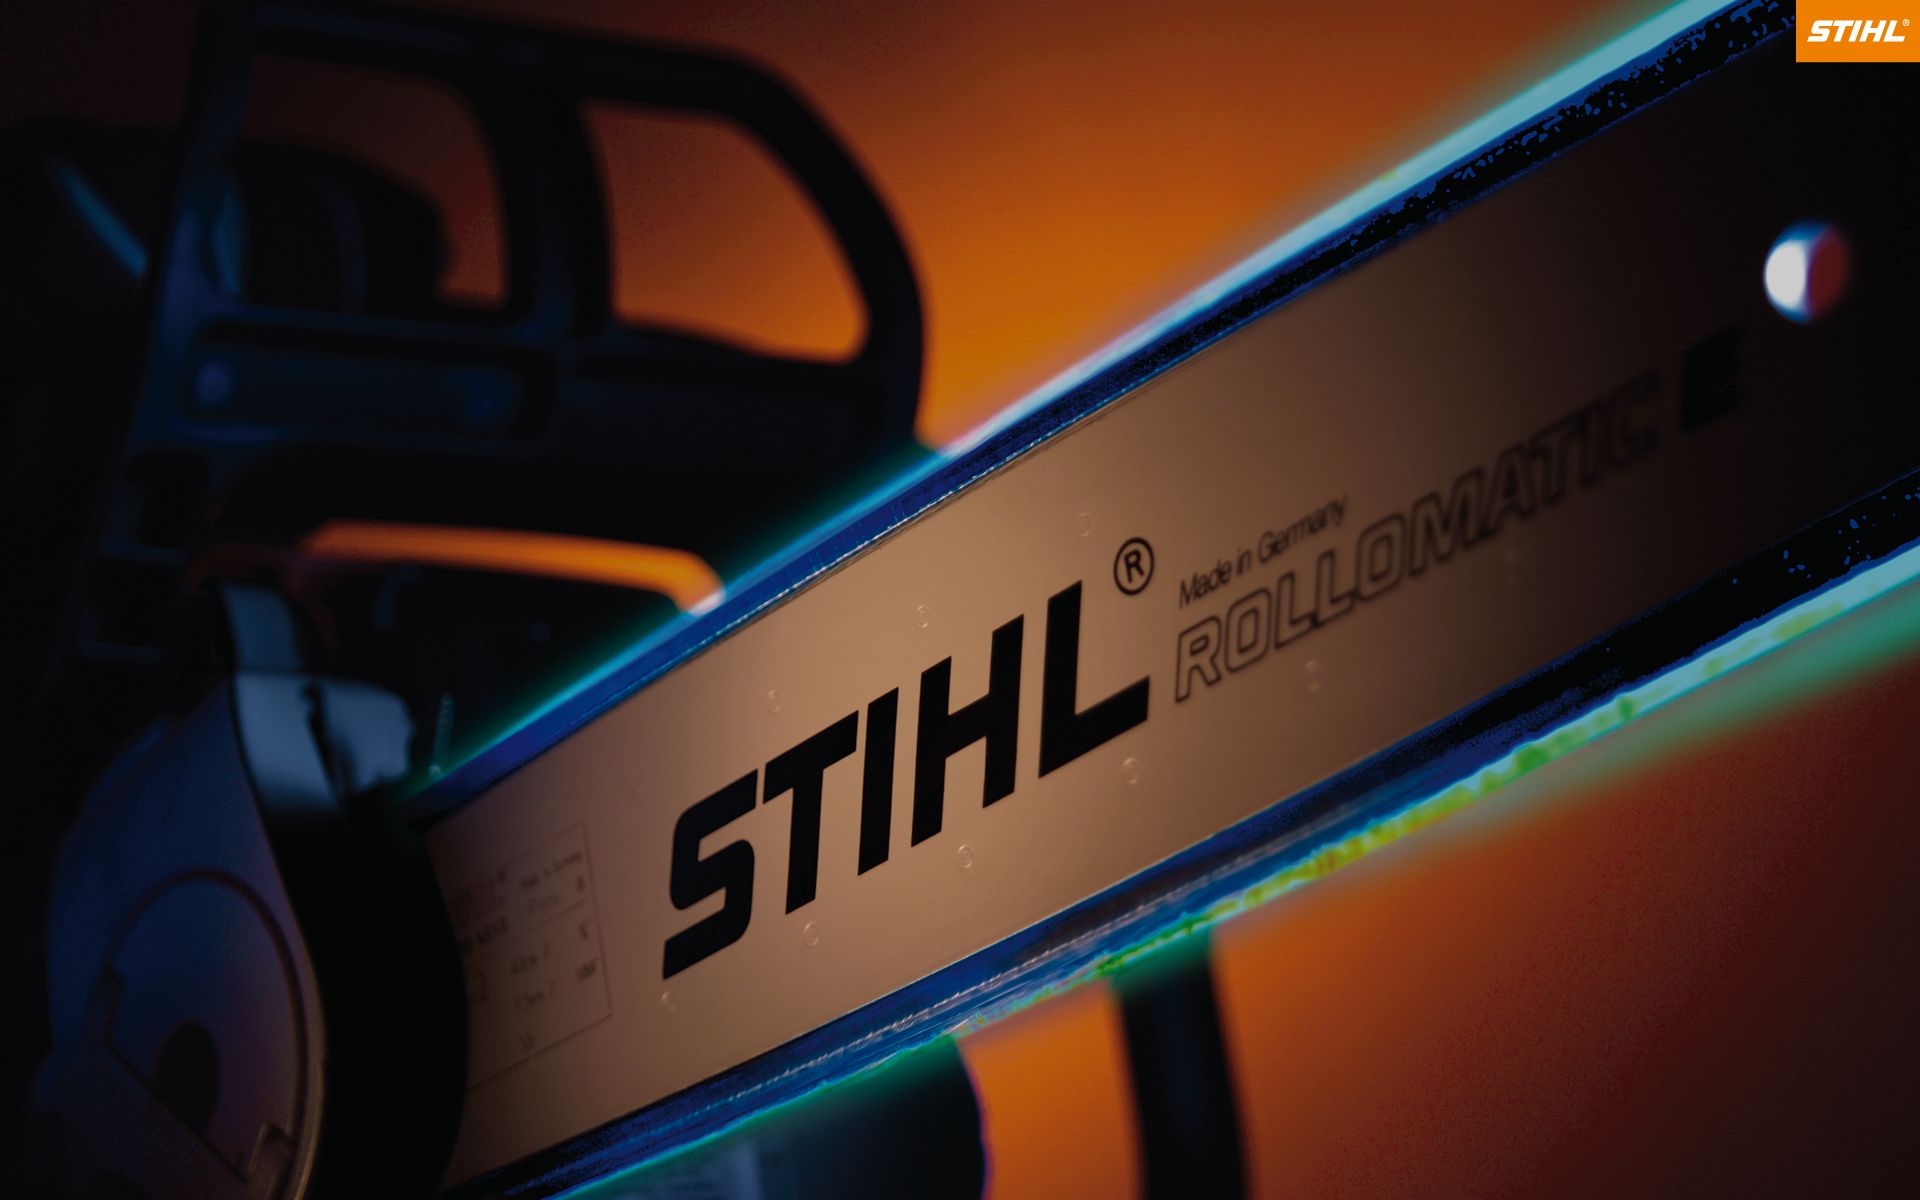 Our Wallpaper for more STIHL on your screen